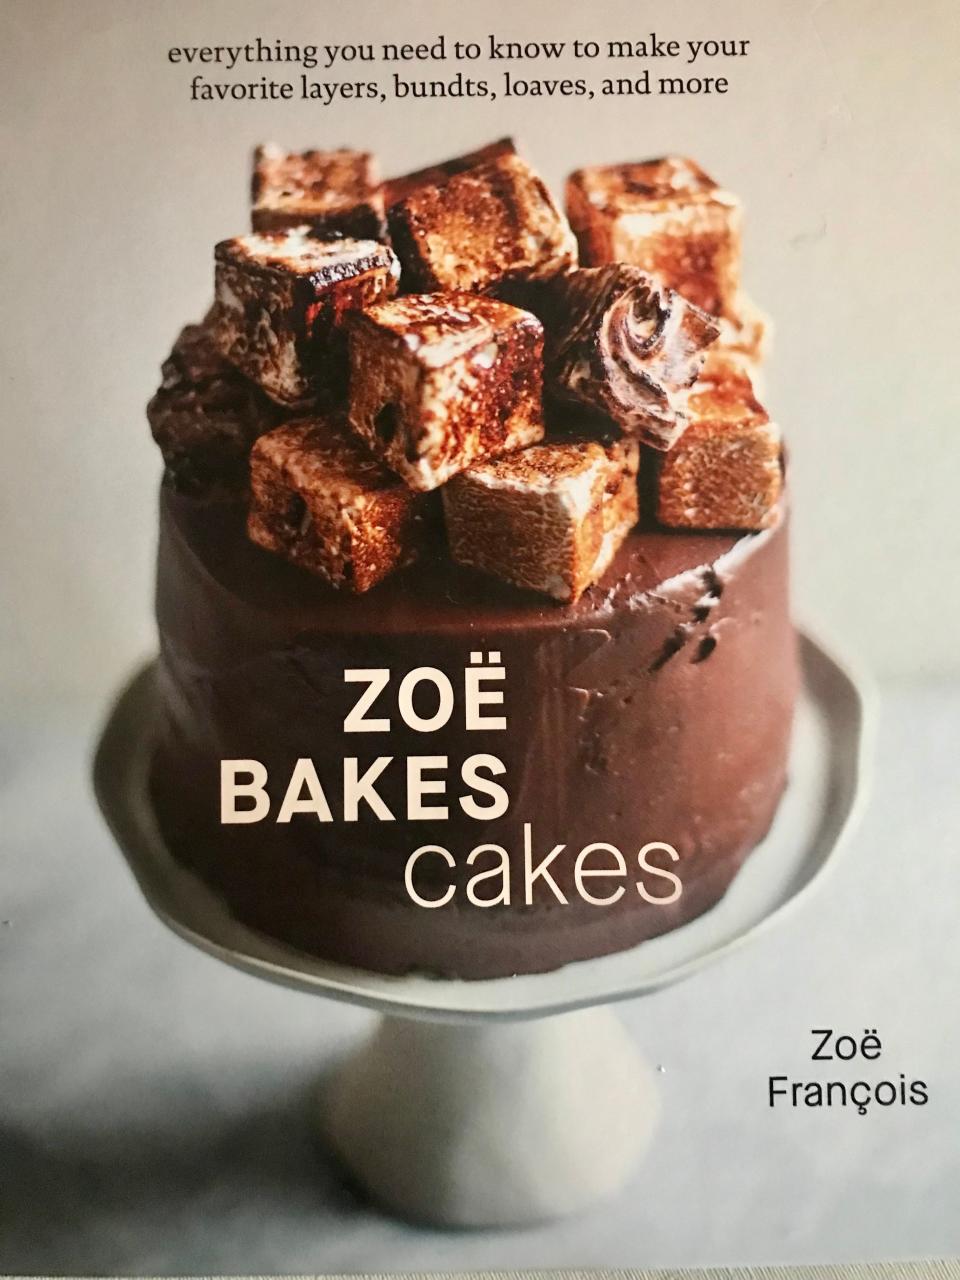 In "Zoe Bakes Cakes," Zoe Francois offers cakes for every baking skill level, from Bundts to a wedding cake.